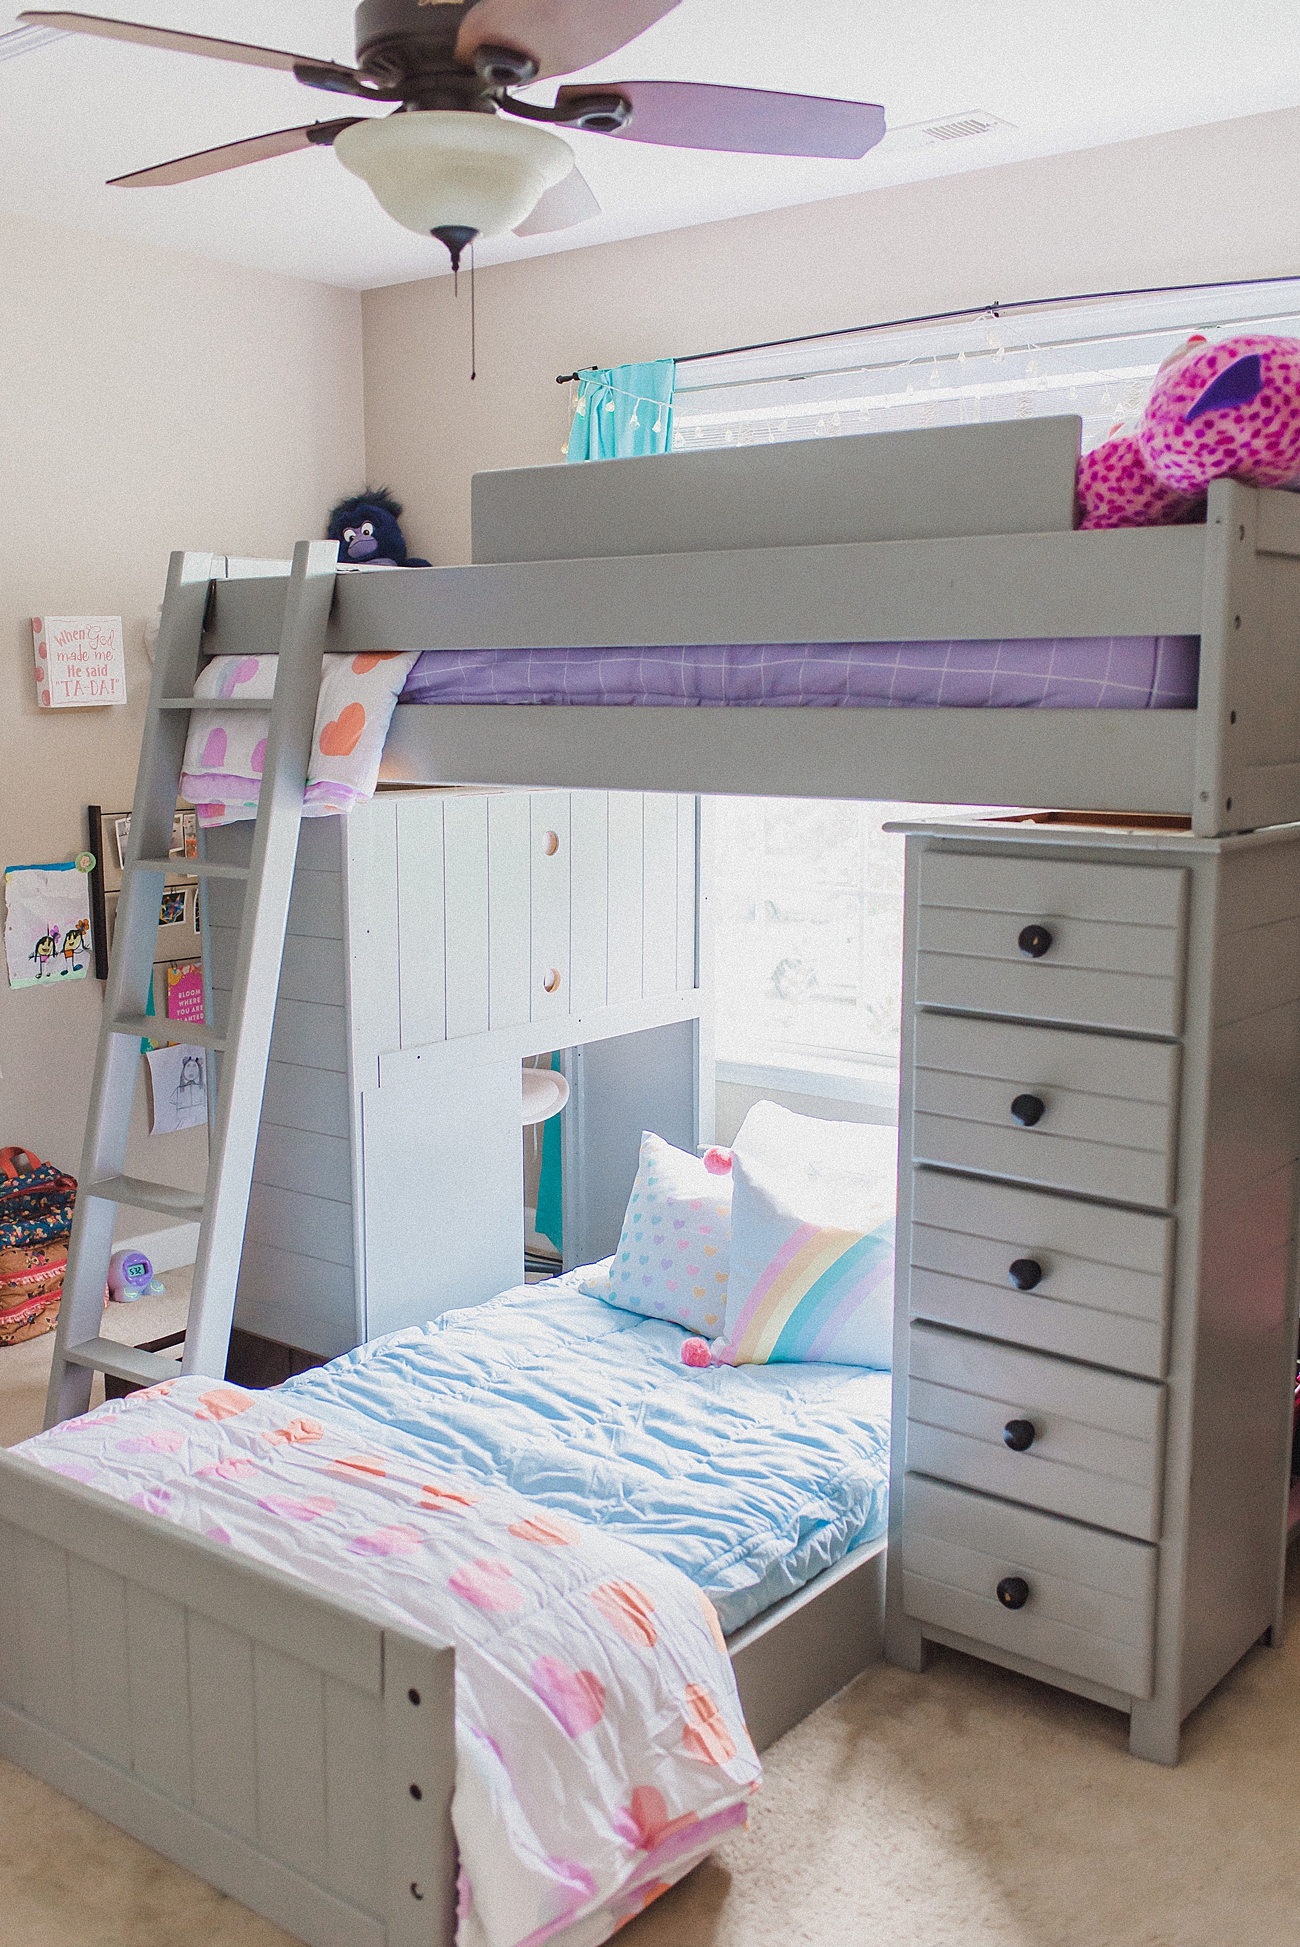 The Best Bedding For Bunk Beds Beddy, How To Put Sheets On A Bunk Bed